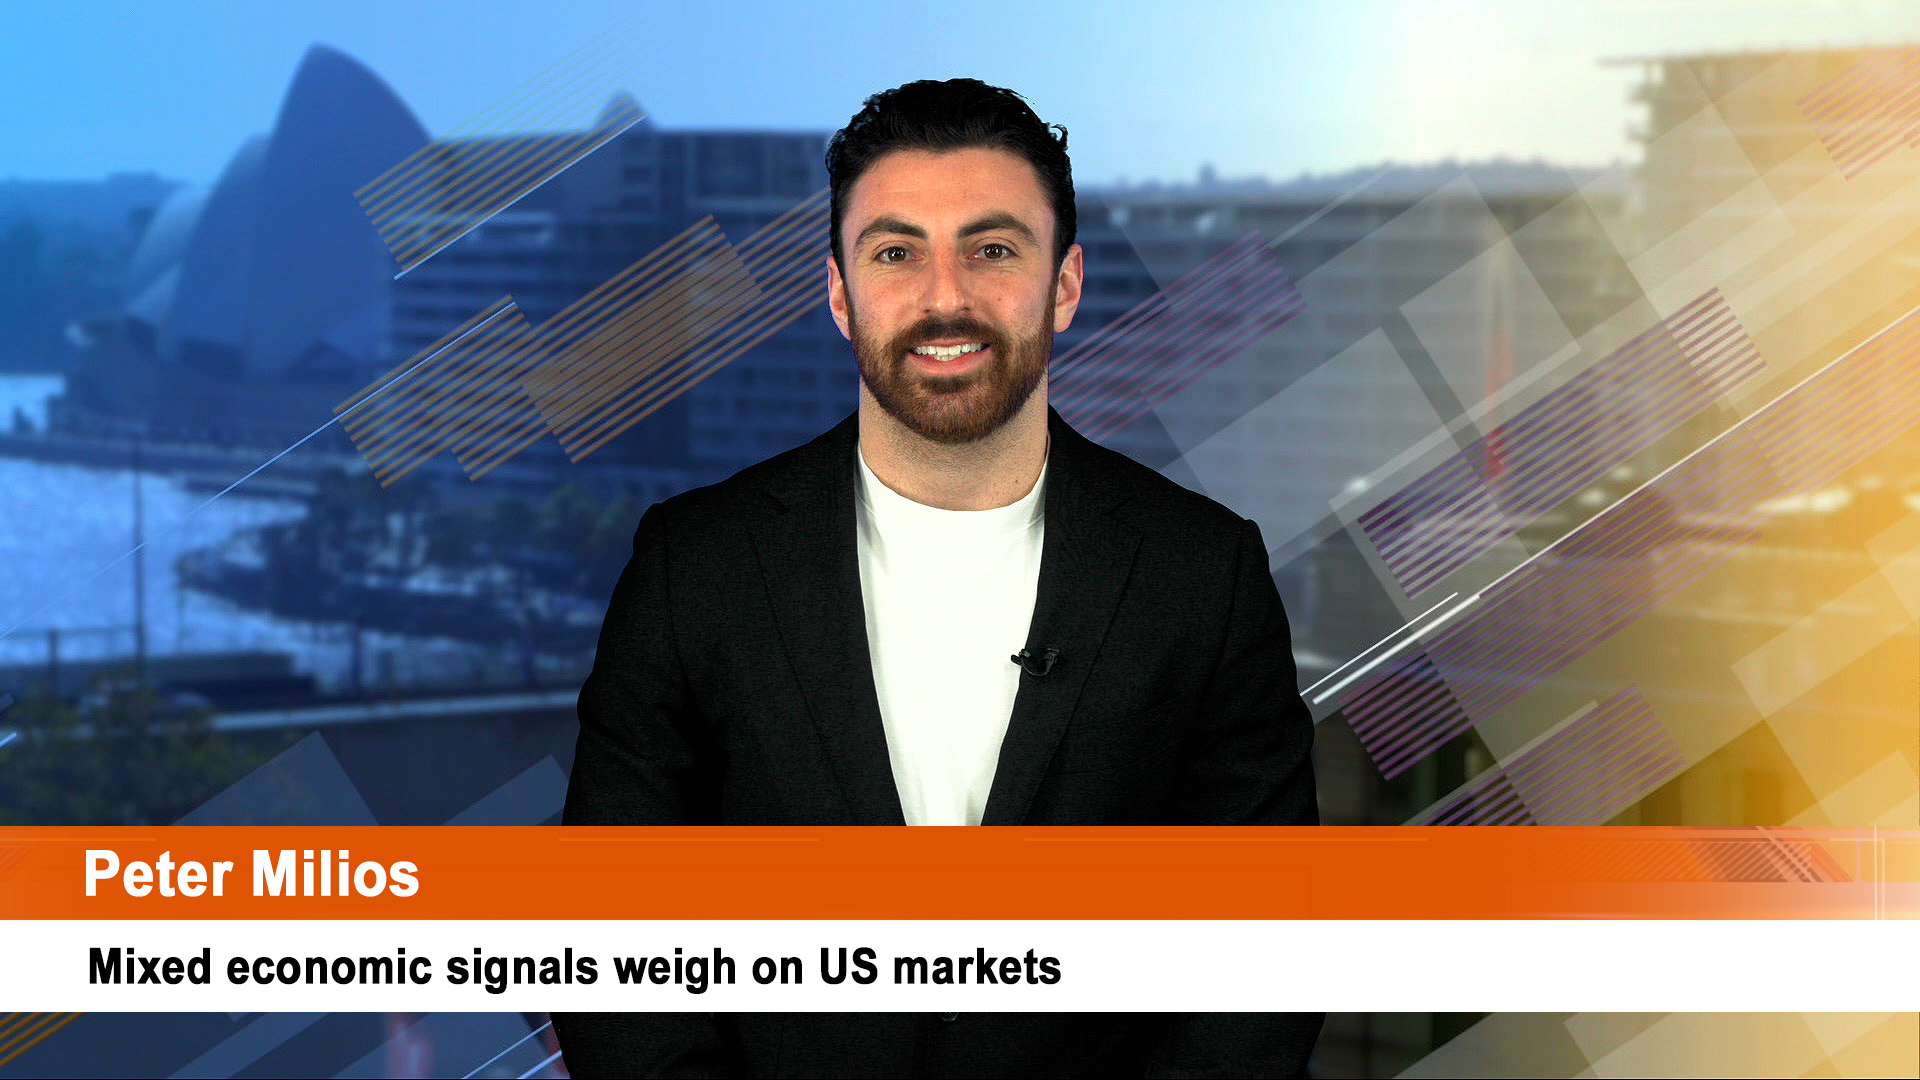 Mixed economic signals weigh on US markets